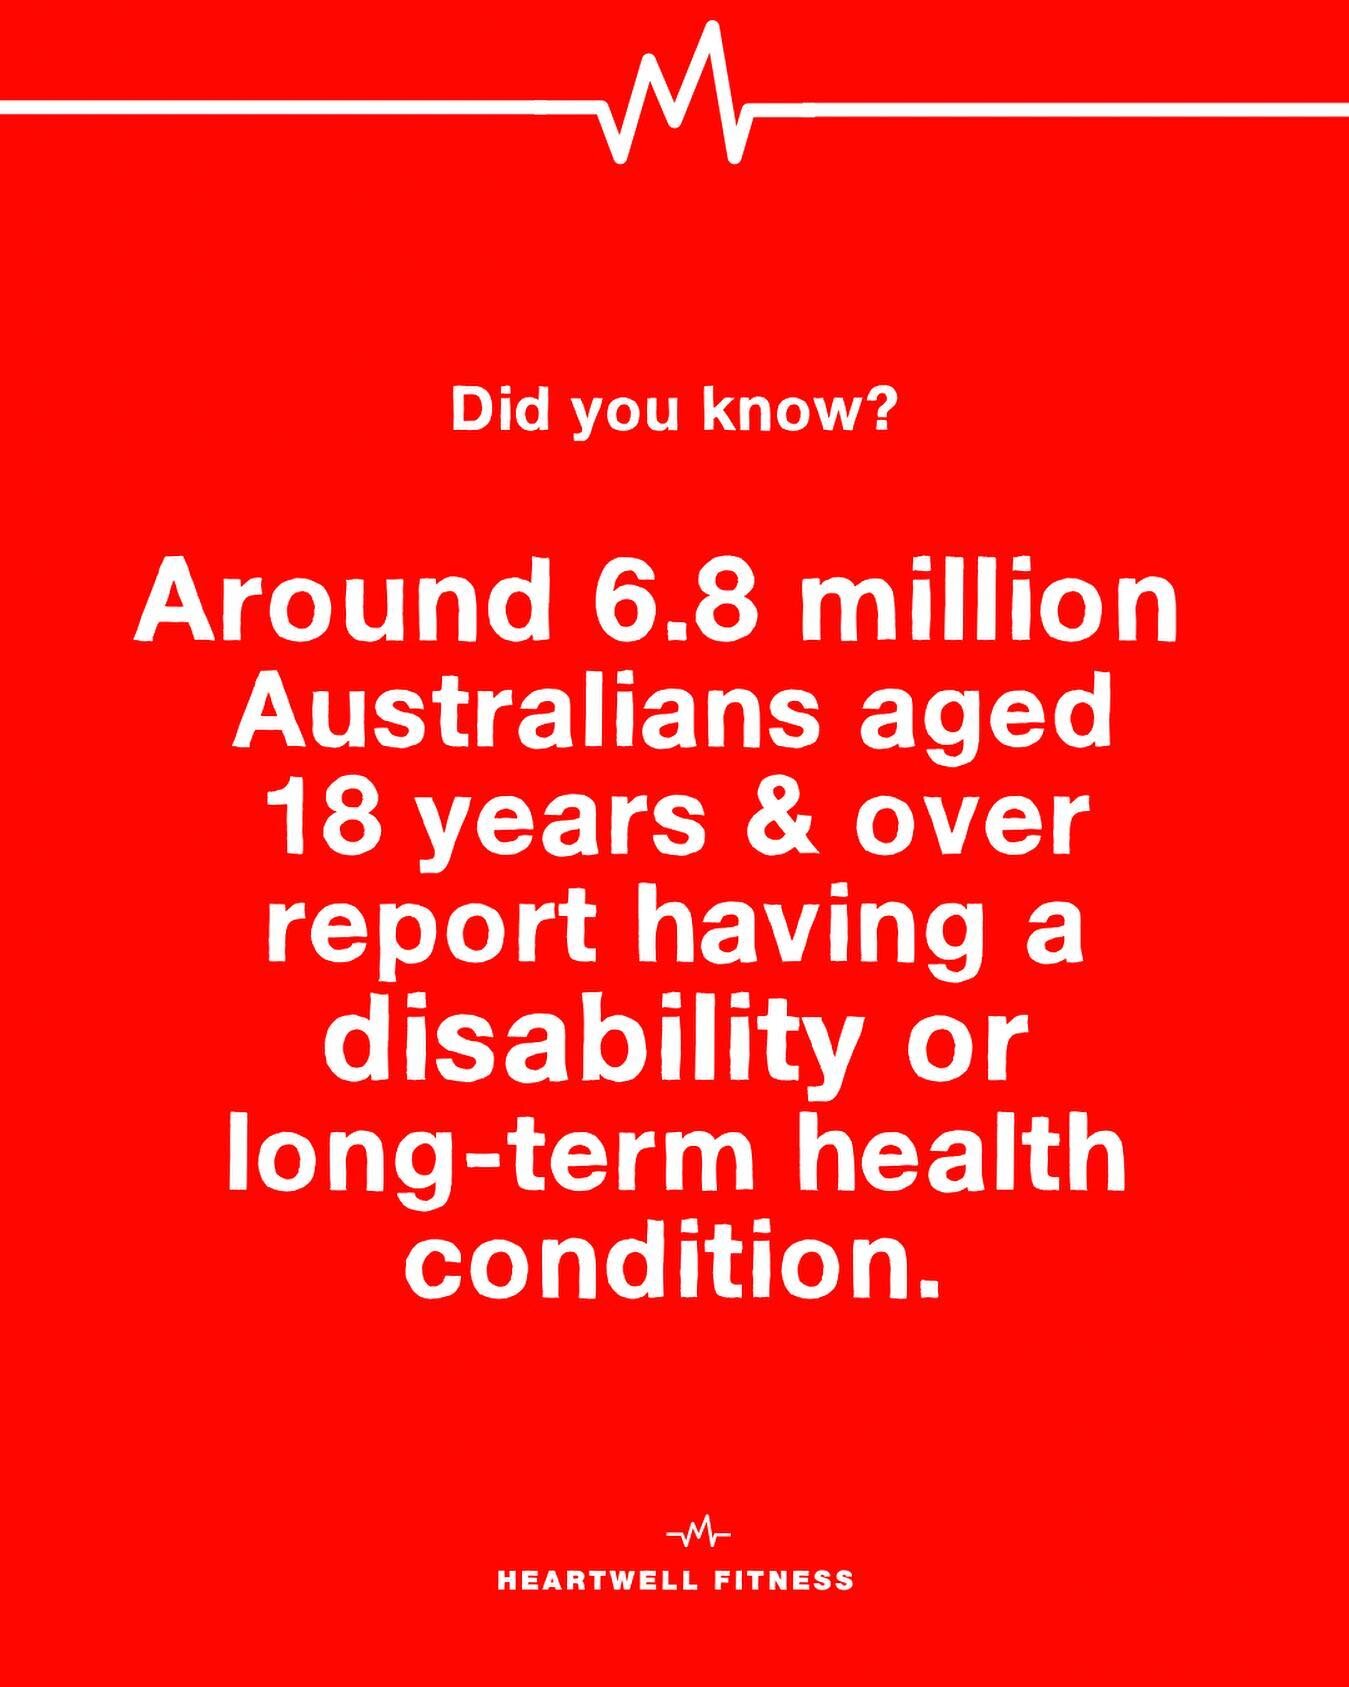 Forty percent of Australians are living with disability or illness. Access to consistent, safe physical education and rehabilitation is imperative to increase &amp; maintain quality of life. 

Know somebody who could benefit from Heartwell Fitness&rs